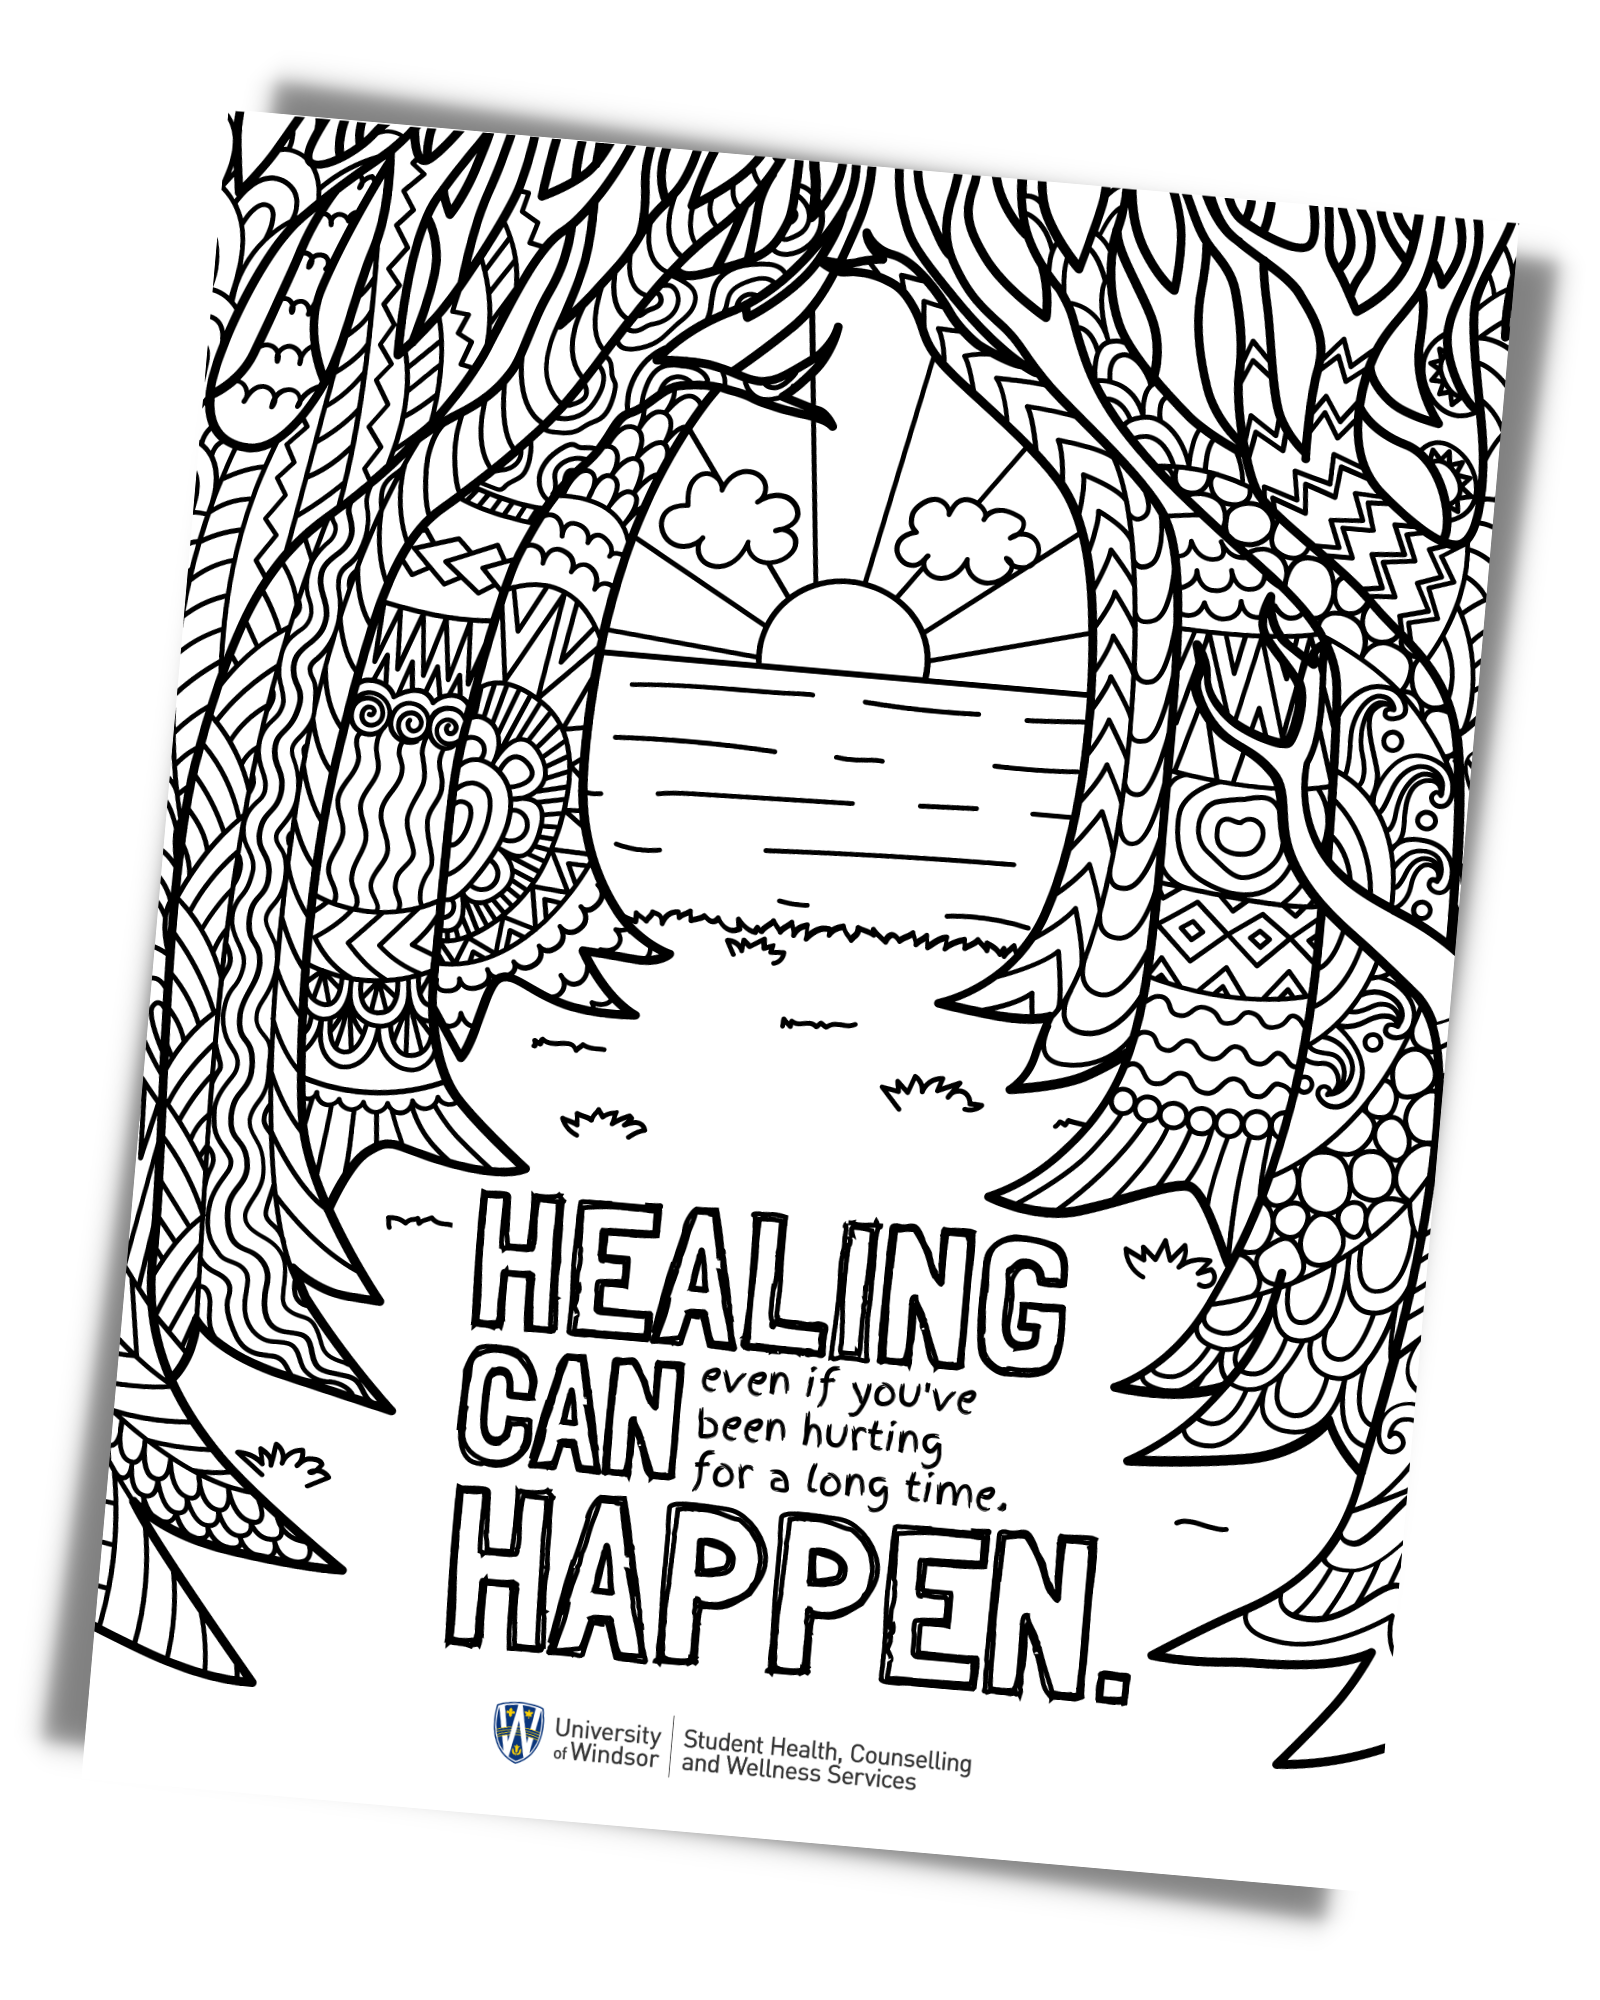 Colouring page with the words "Healing can happen, even if you've been hurting for a long time"